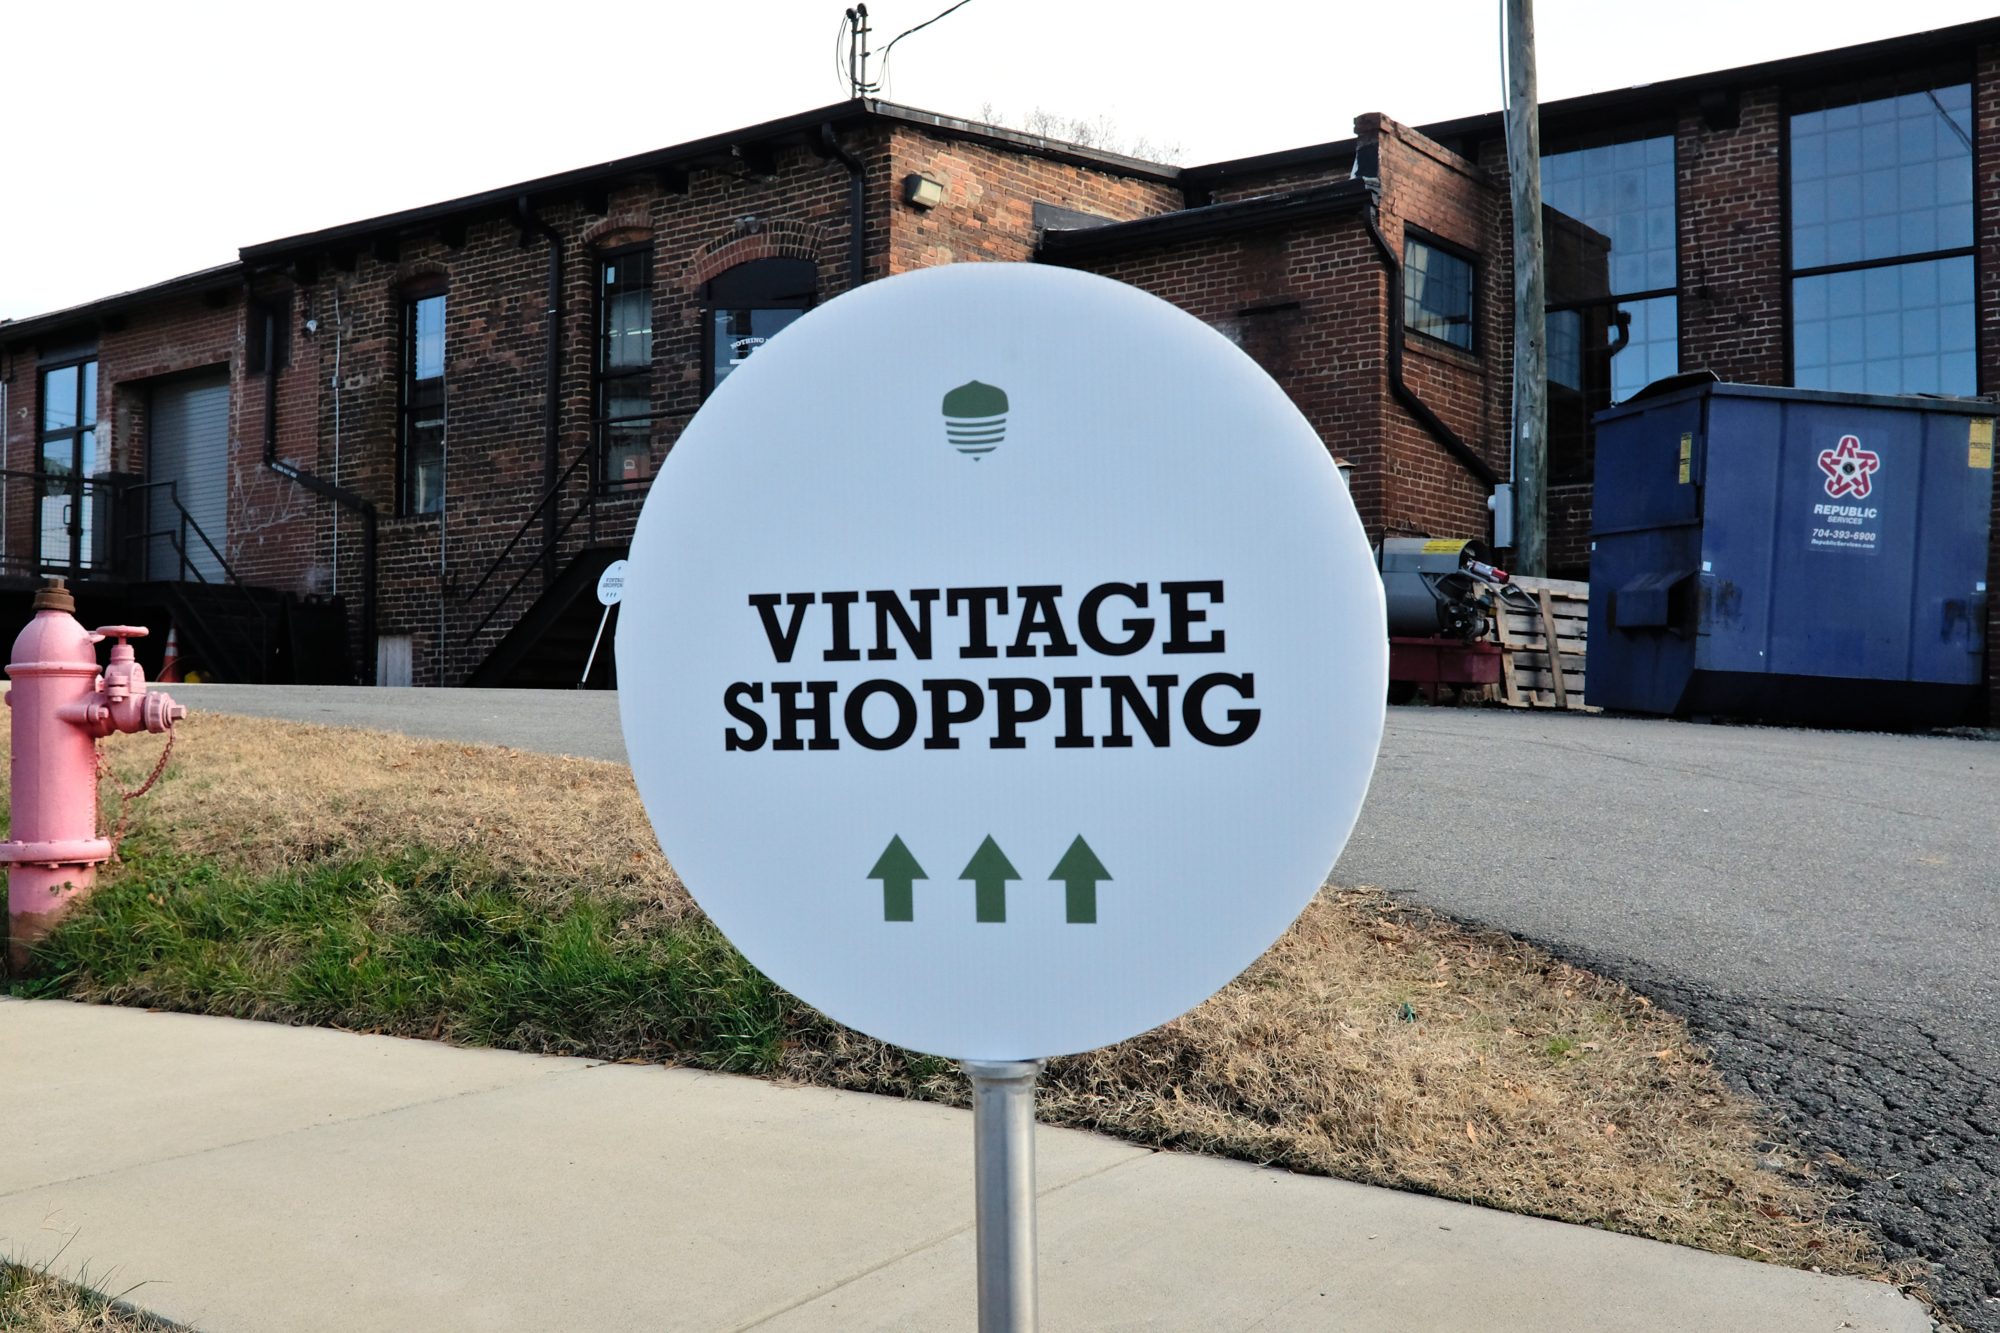 Sign that reads "Vintage Shopping" with arrows pointing ahead